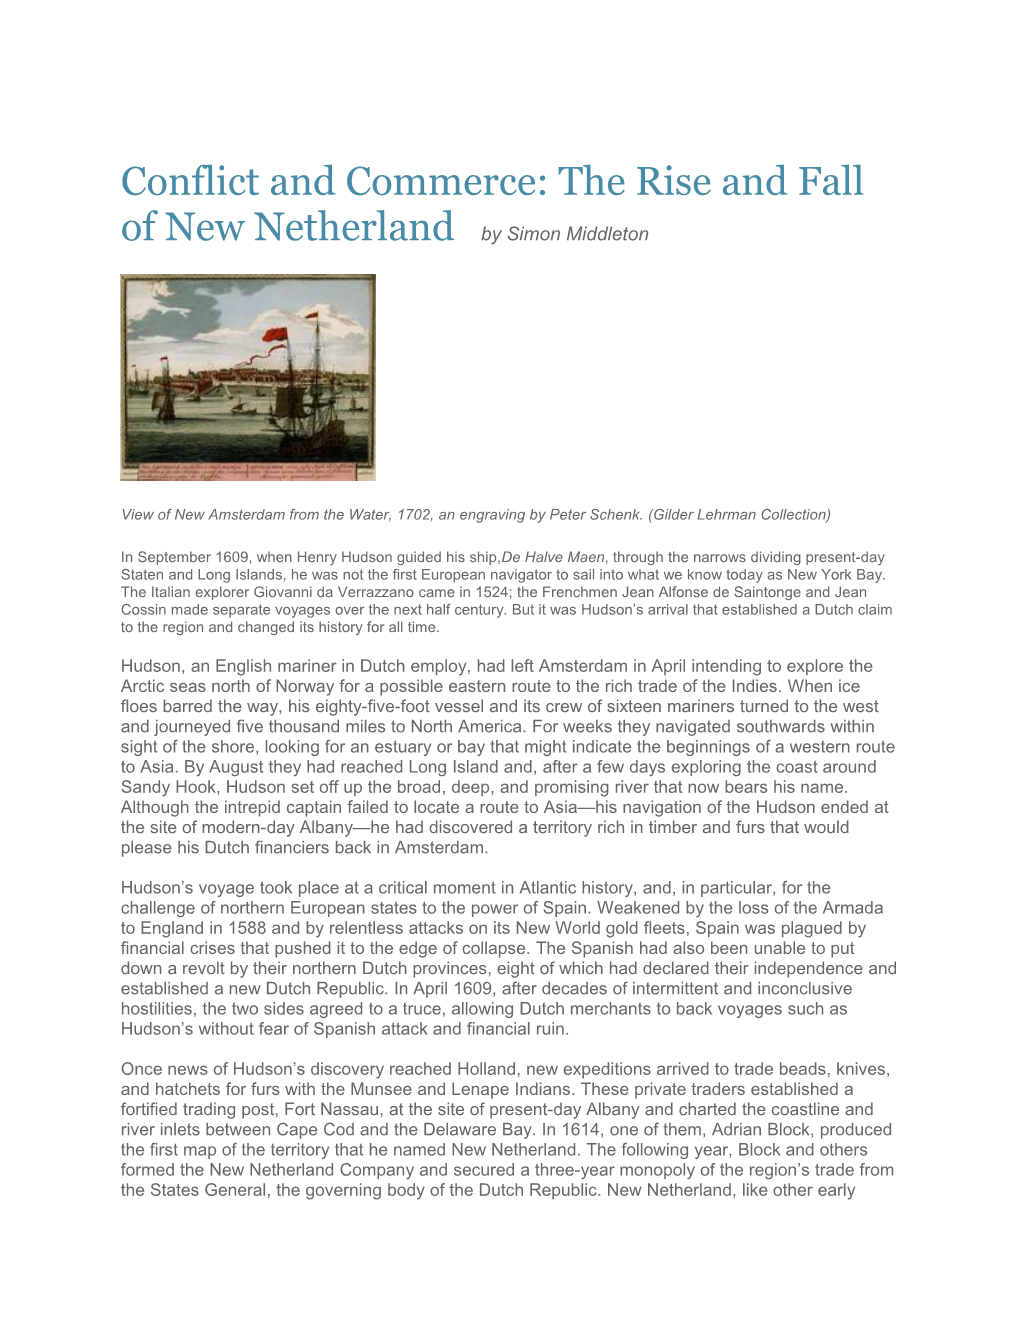 Conflict and Commerce: the Rise and Fall of New Netherland by Simon Middleton